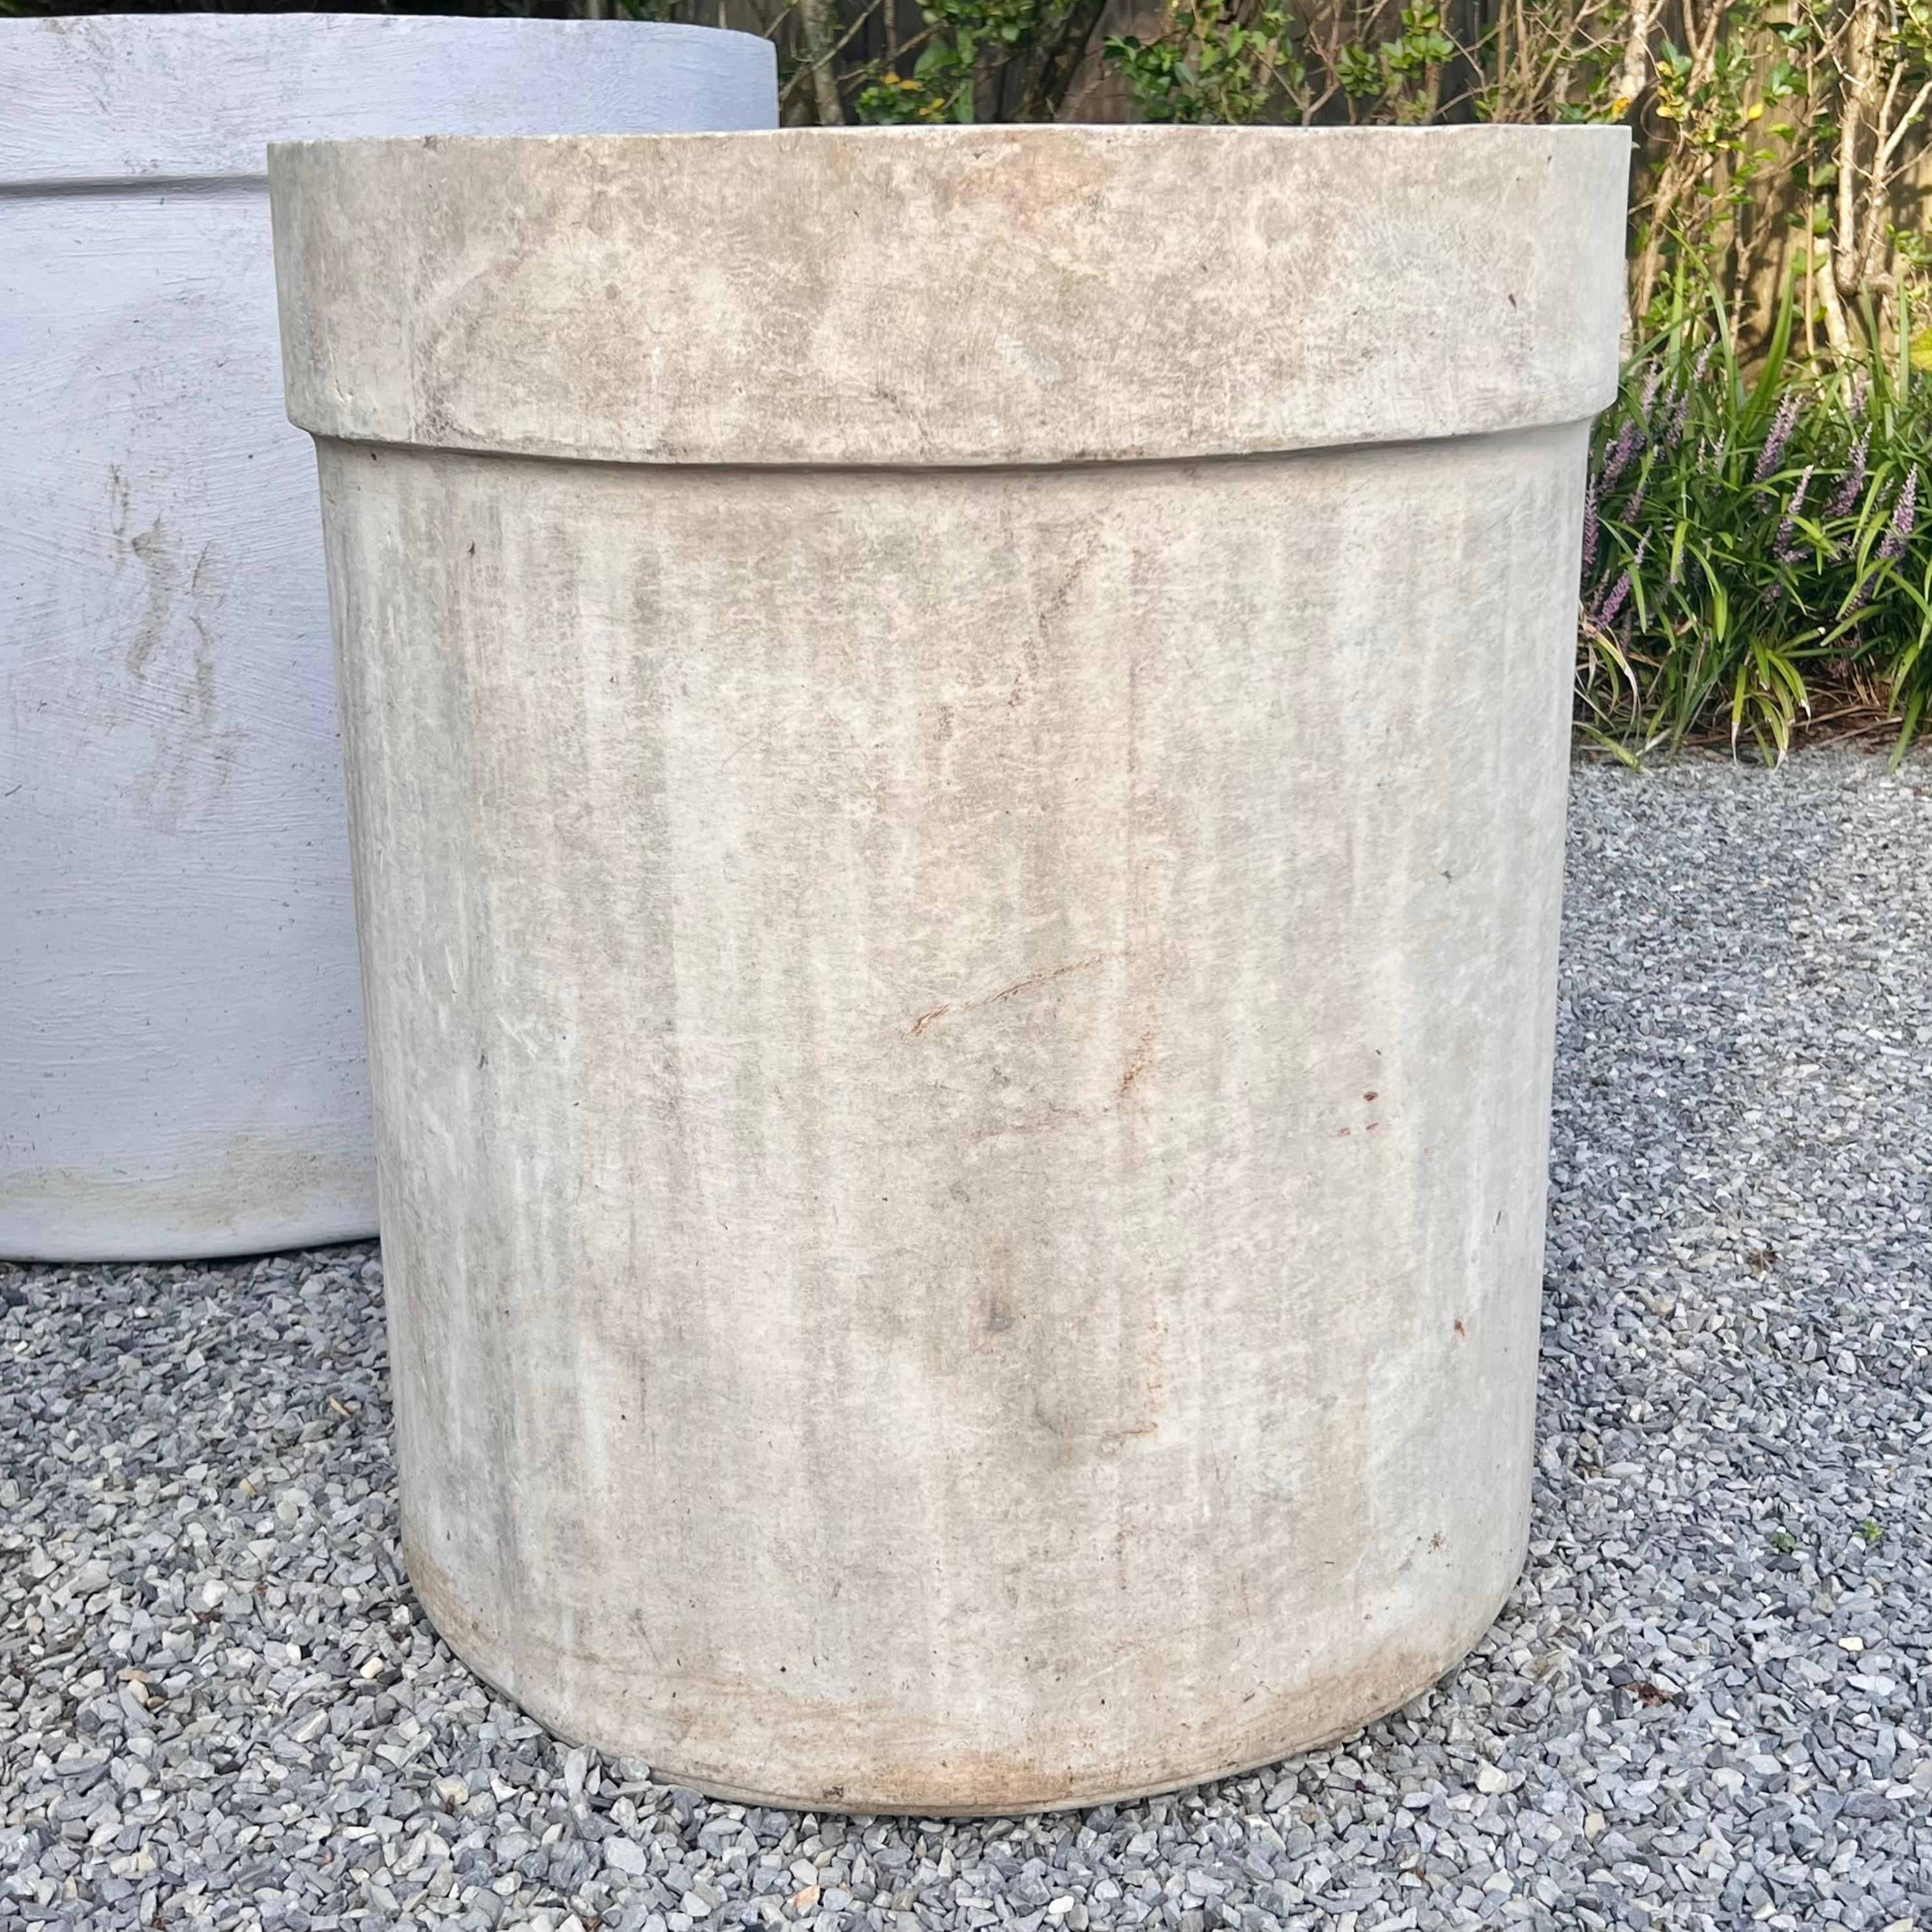 Swiss Monumental Cylindrical Concrete Tree Planter, 1960s Switzerland For Sale